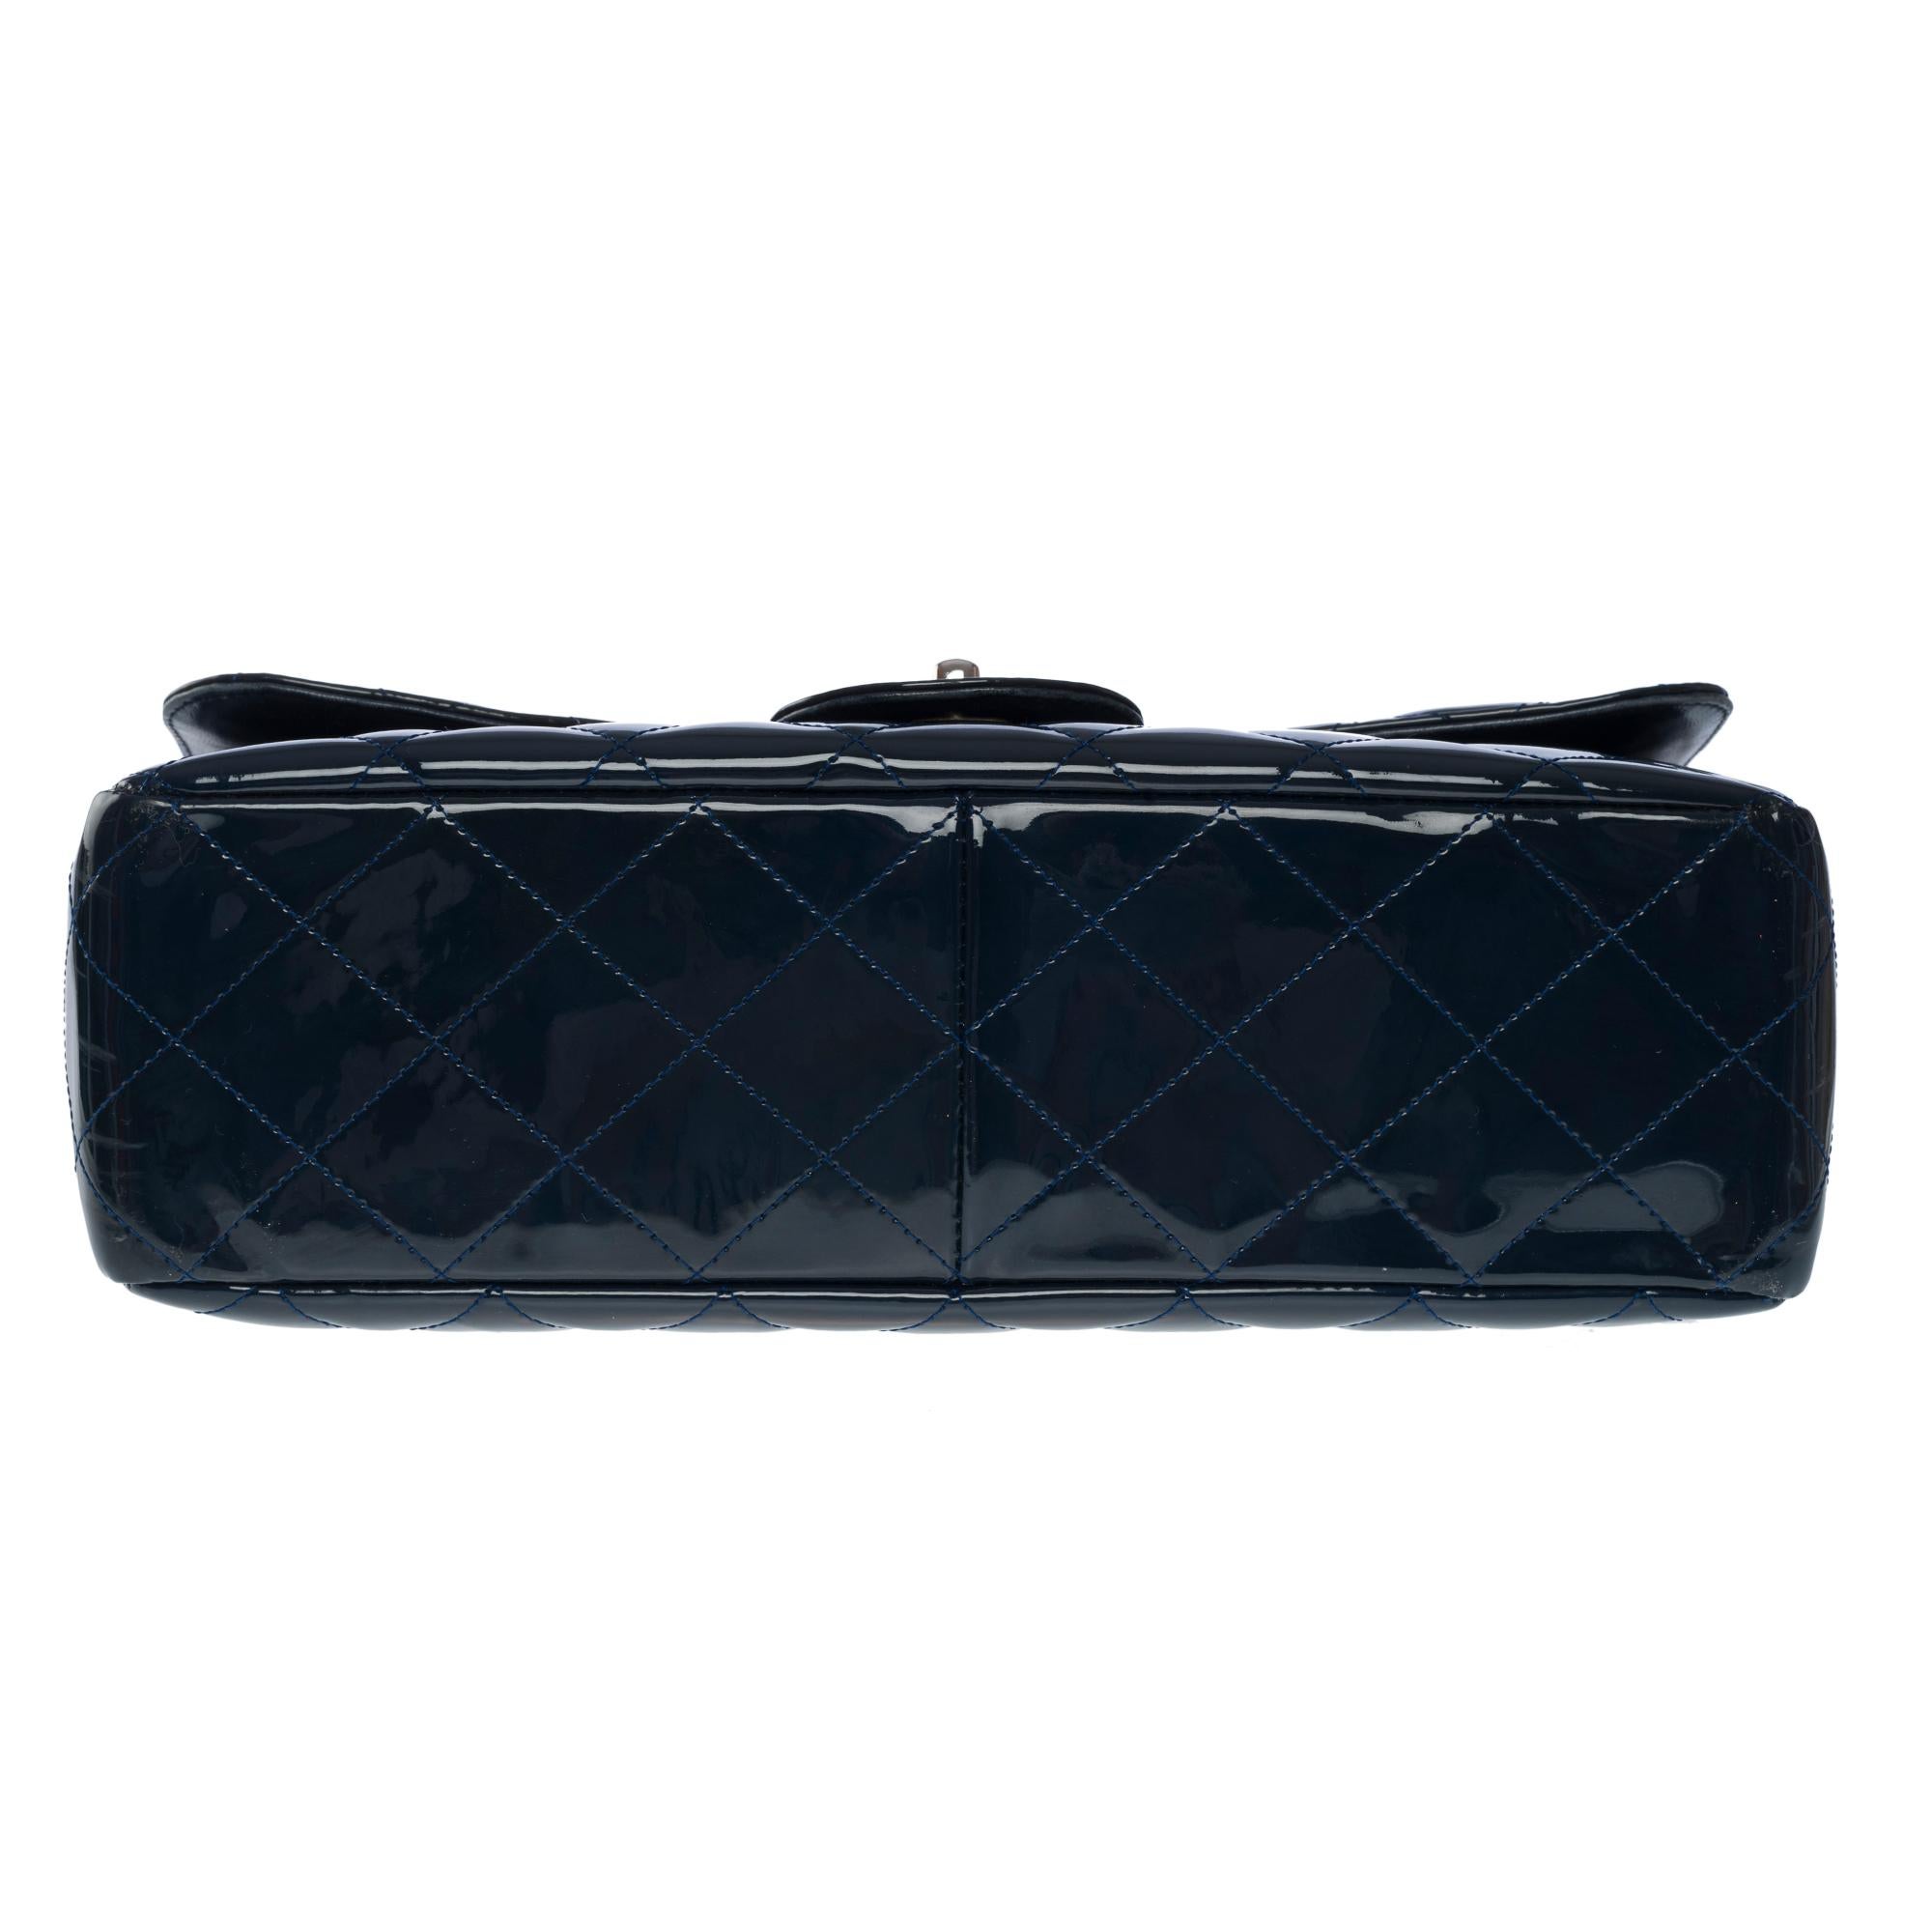 Lovely Chanel Timeless Jumbo shoulder flap bag in Navy blue patent leather, SHW 6